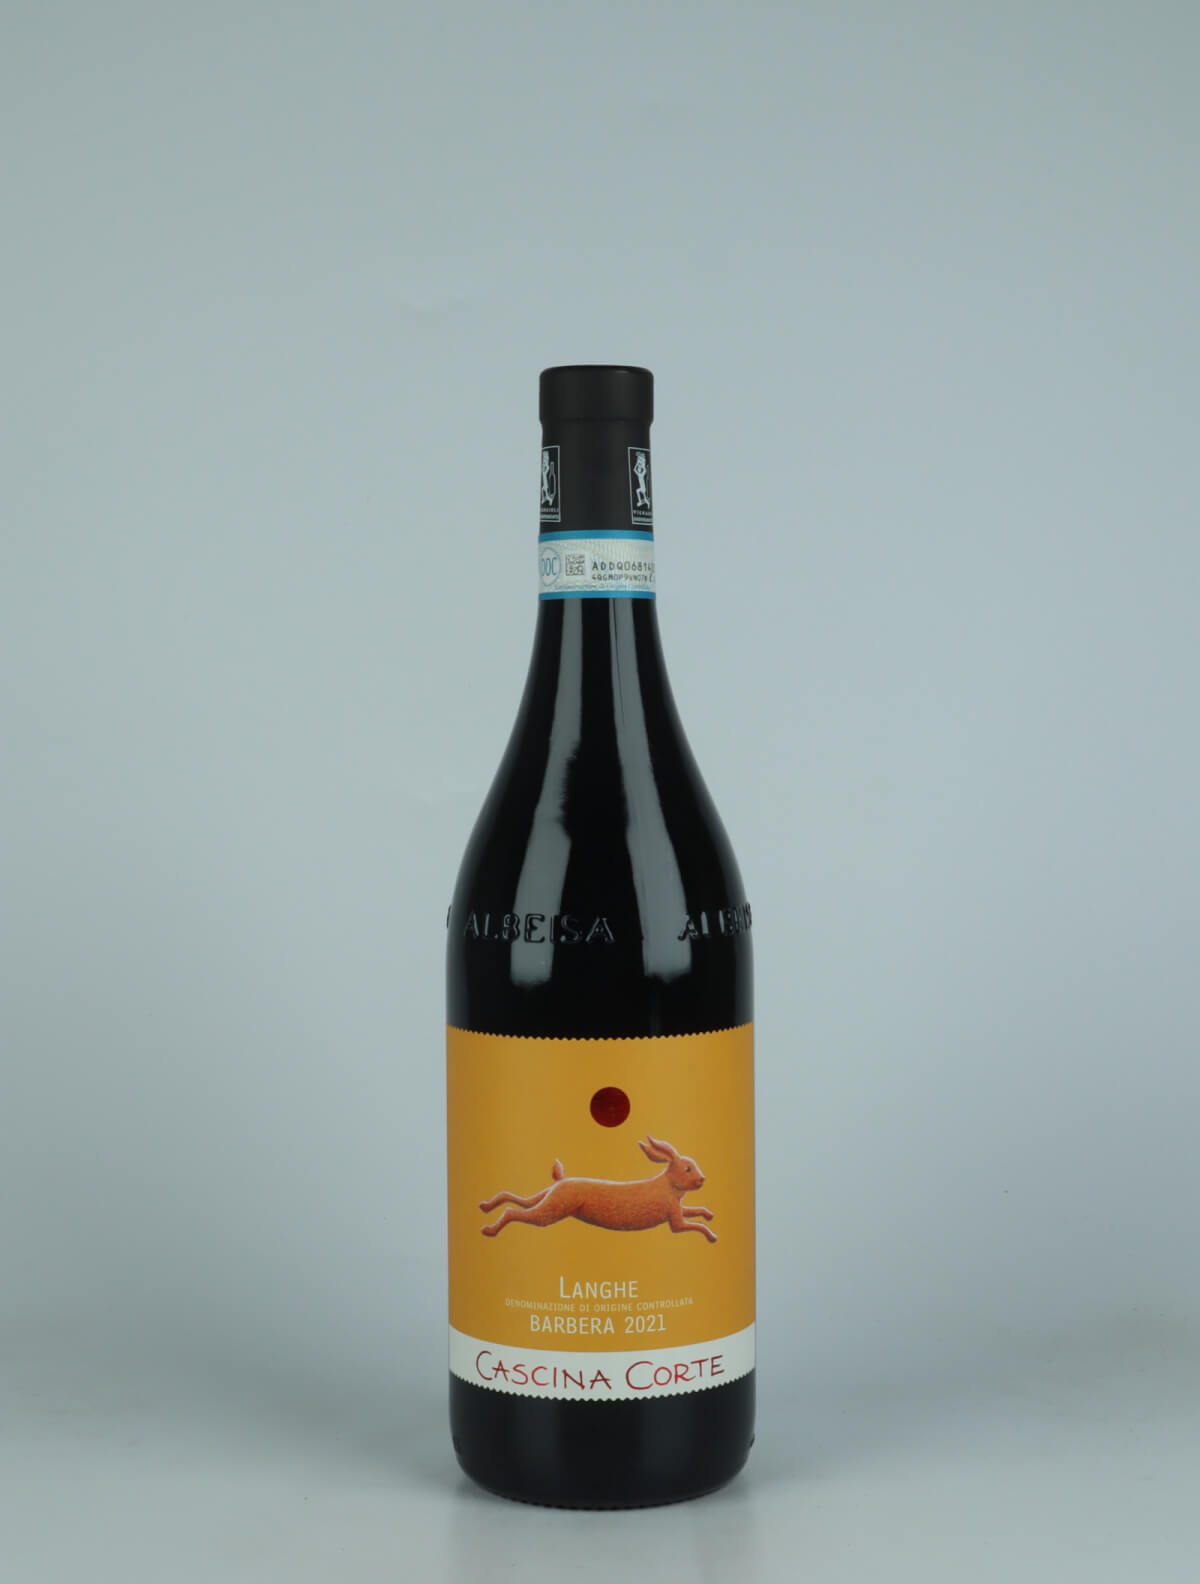 A bottle 2021 Langhe Barbera Red wine from Cascina Corte, Piedmont in Italy